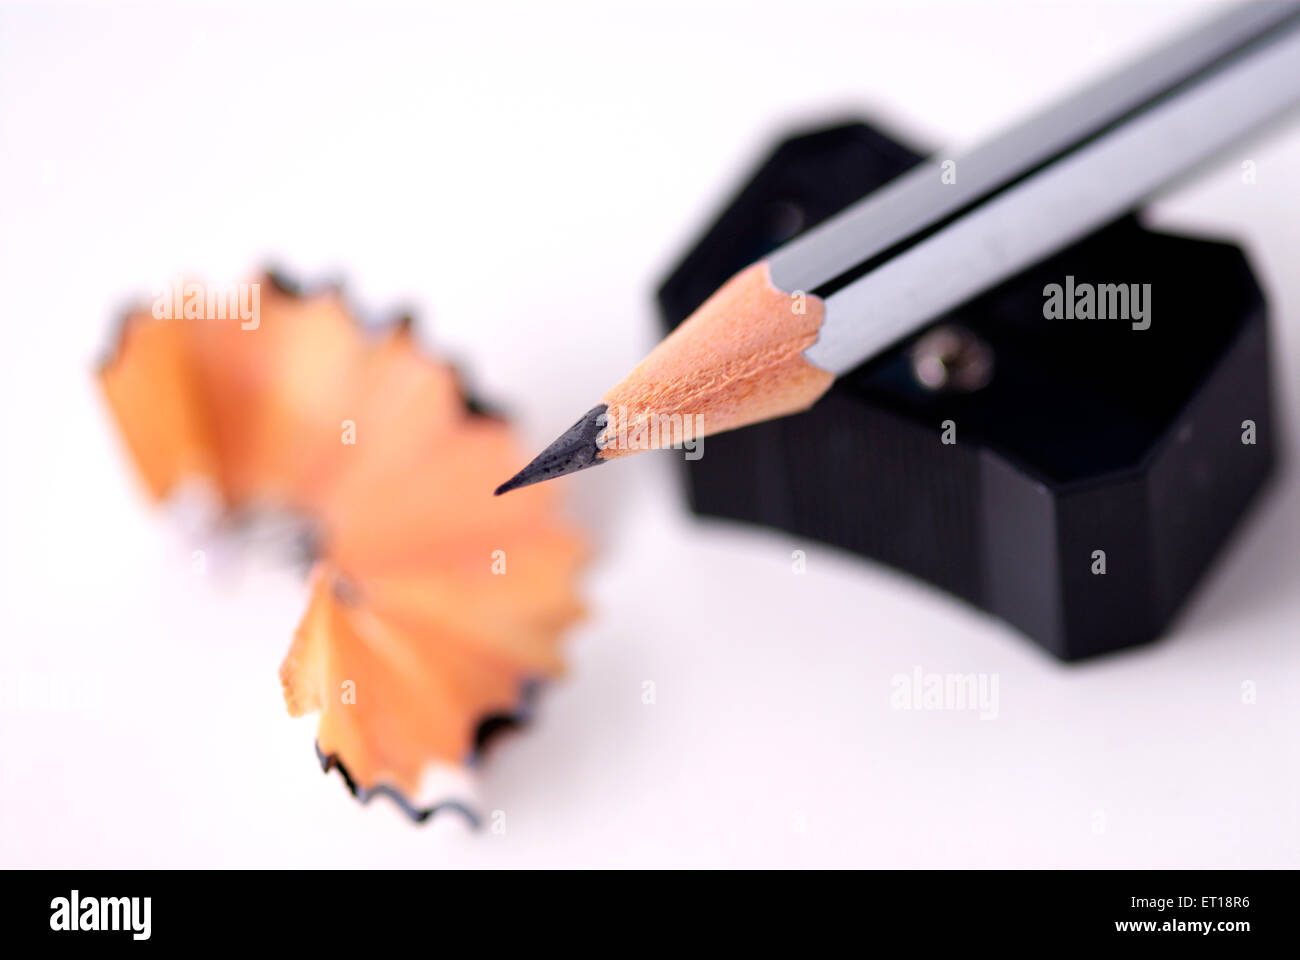 Pencil with sharpener and shaving on white background Stock Photo